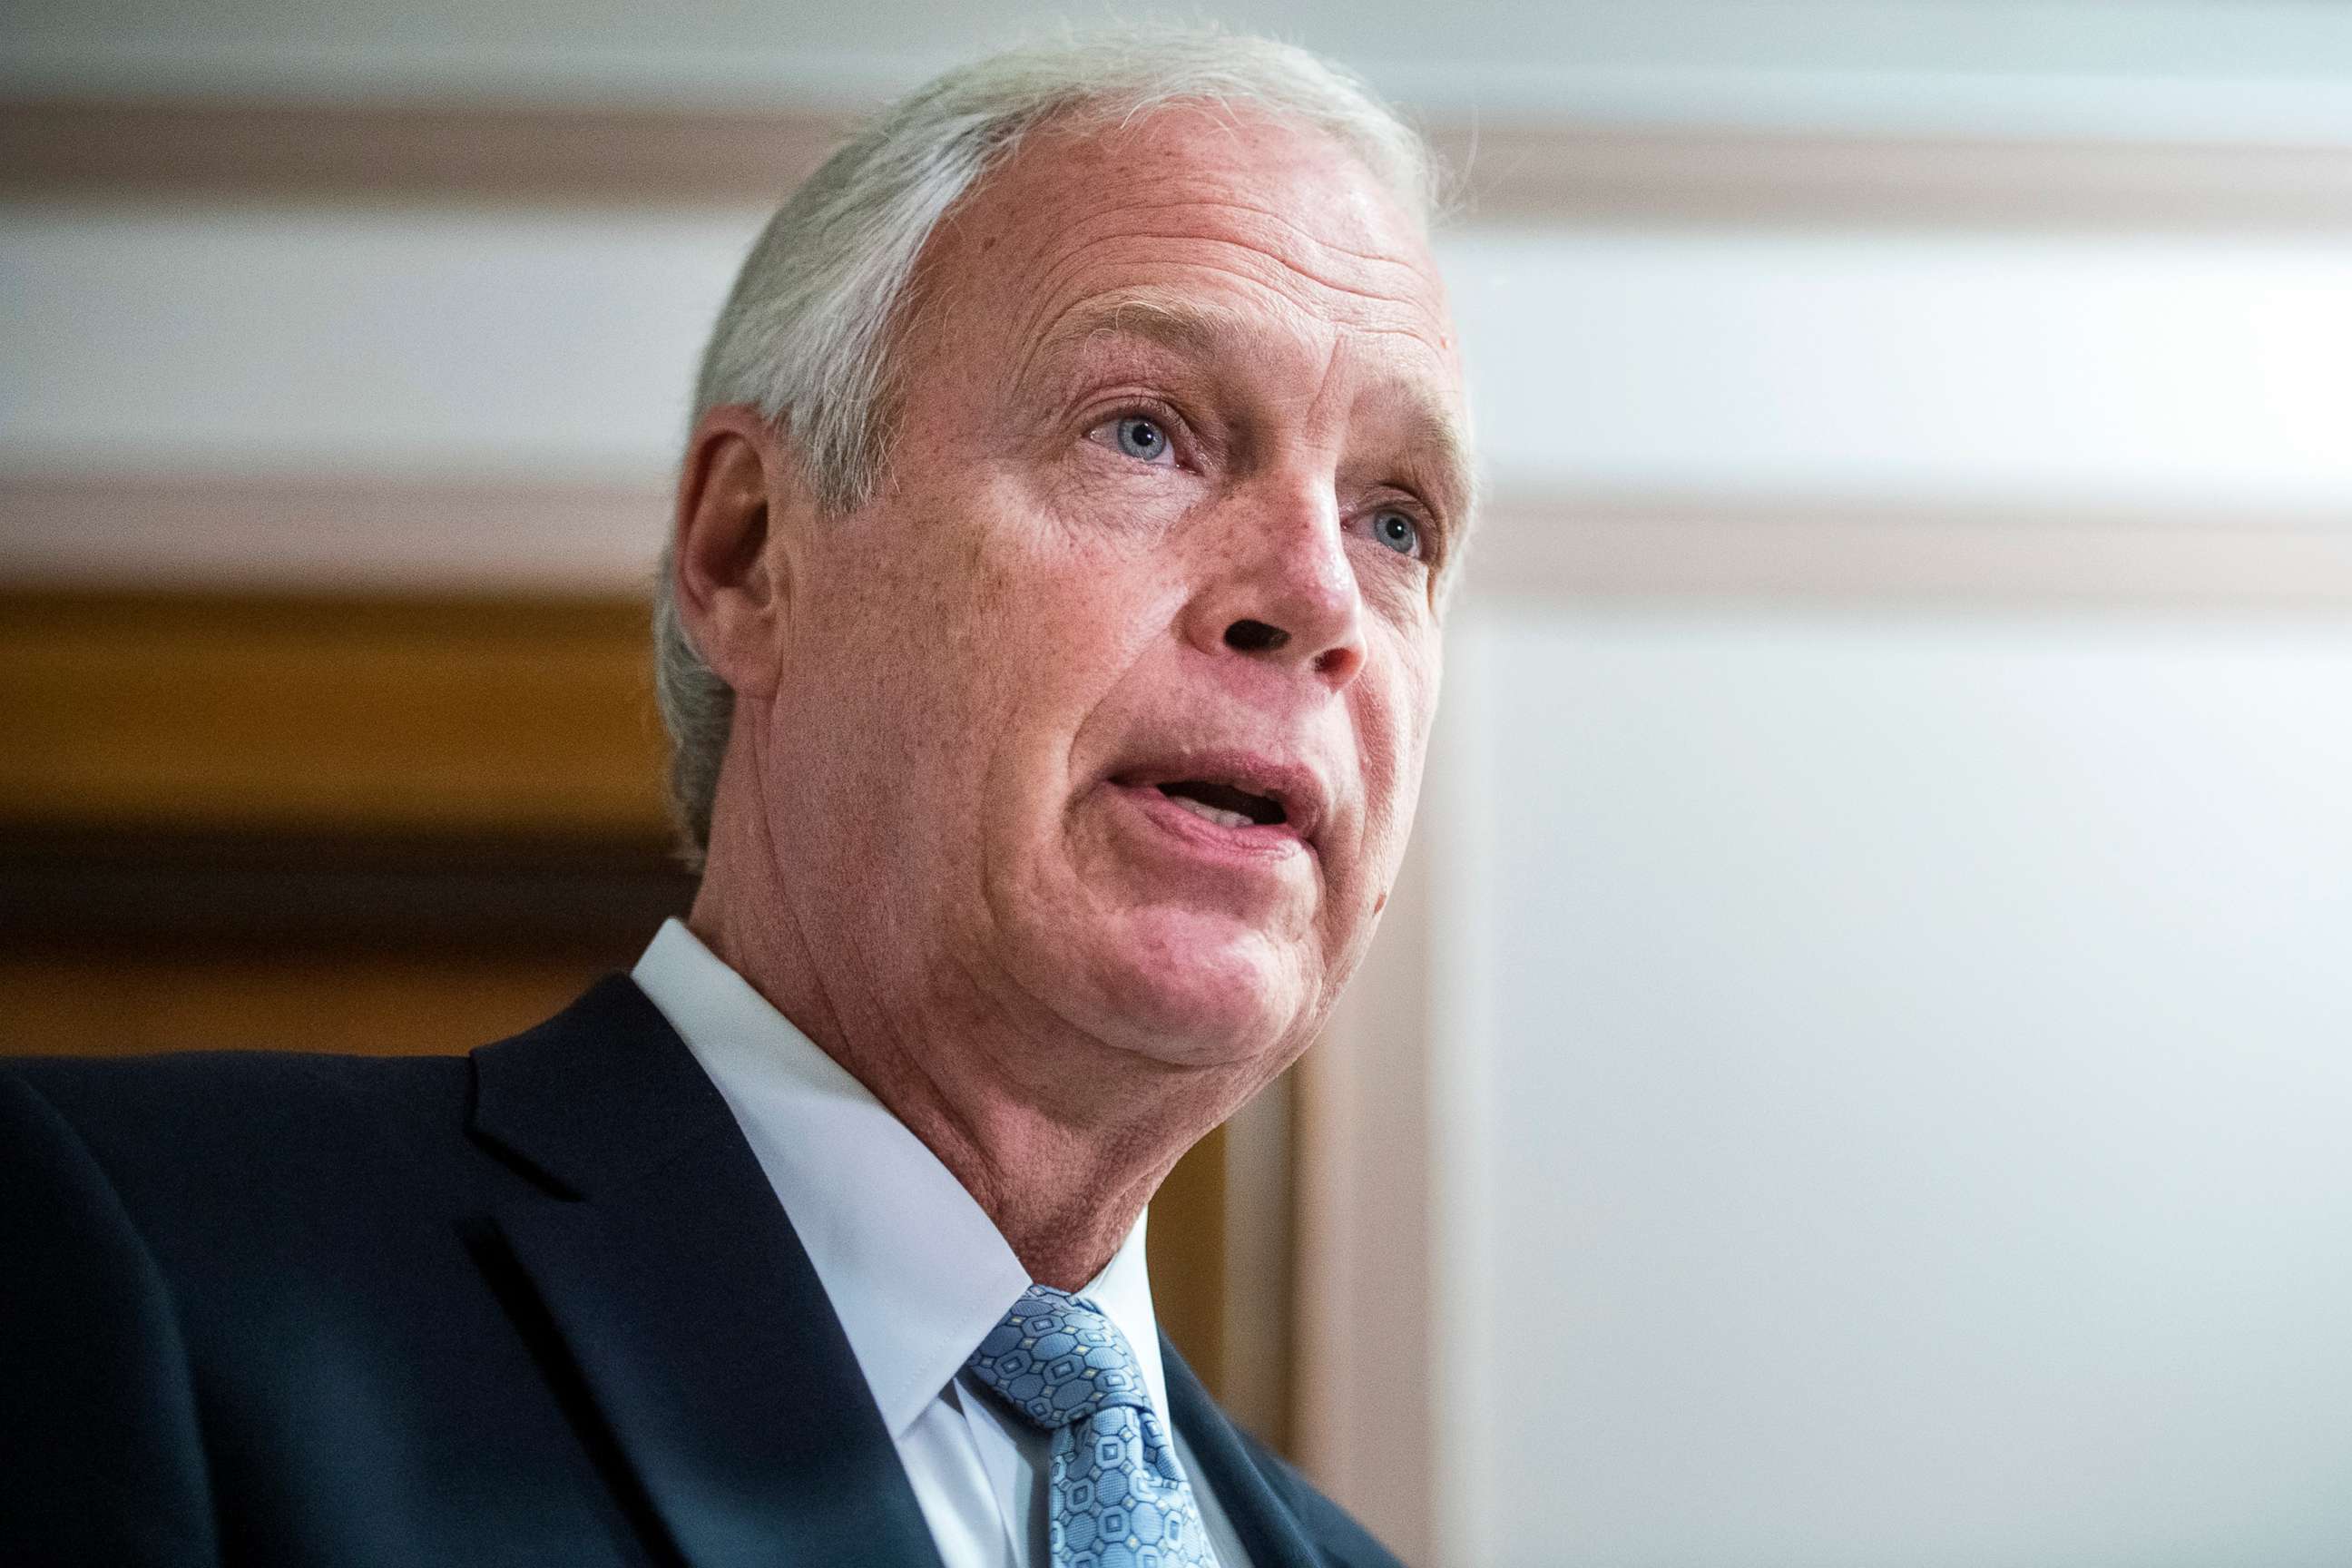 PHOTO: Sen. Ron Johnson arrives for a Senate Homeland Security and Governmental Affairs Committee hearing in Washington, Aug. 6, 2020.